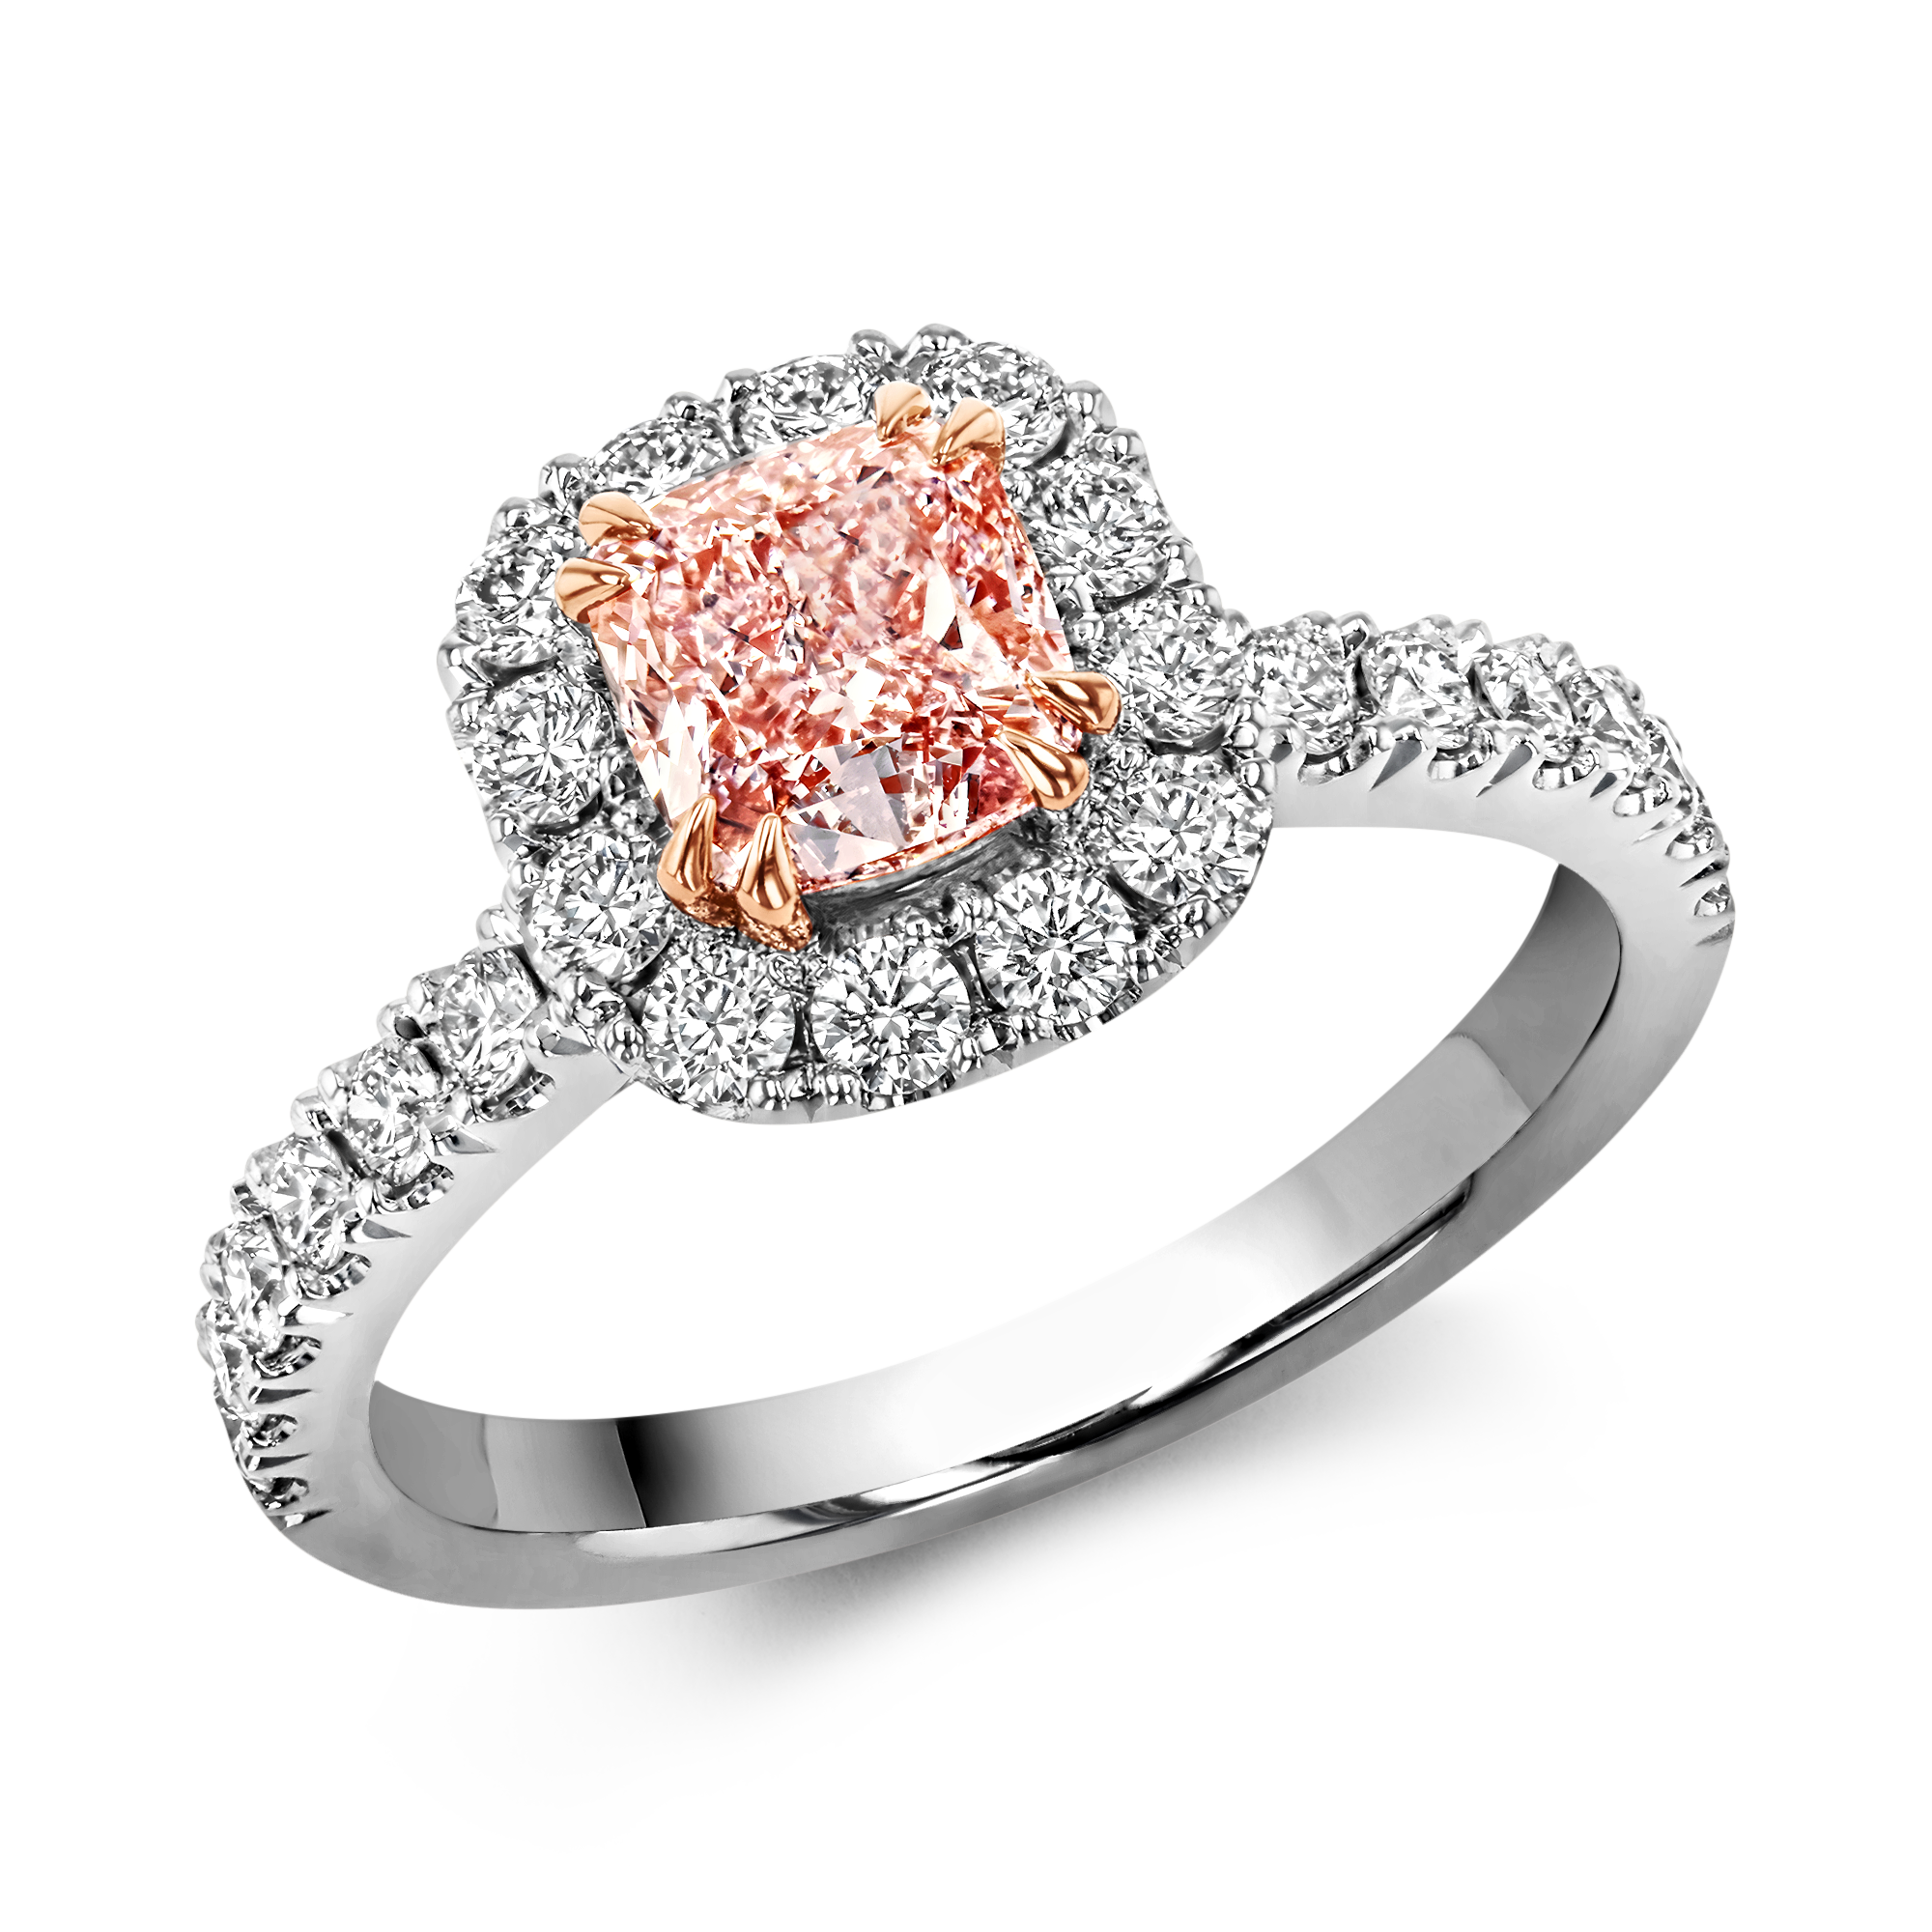 Rosa's Platinum, Diamond And Pink Tapered Baguette Spinel Engagement Ring